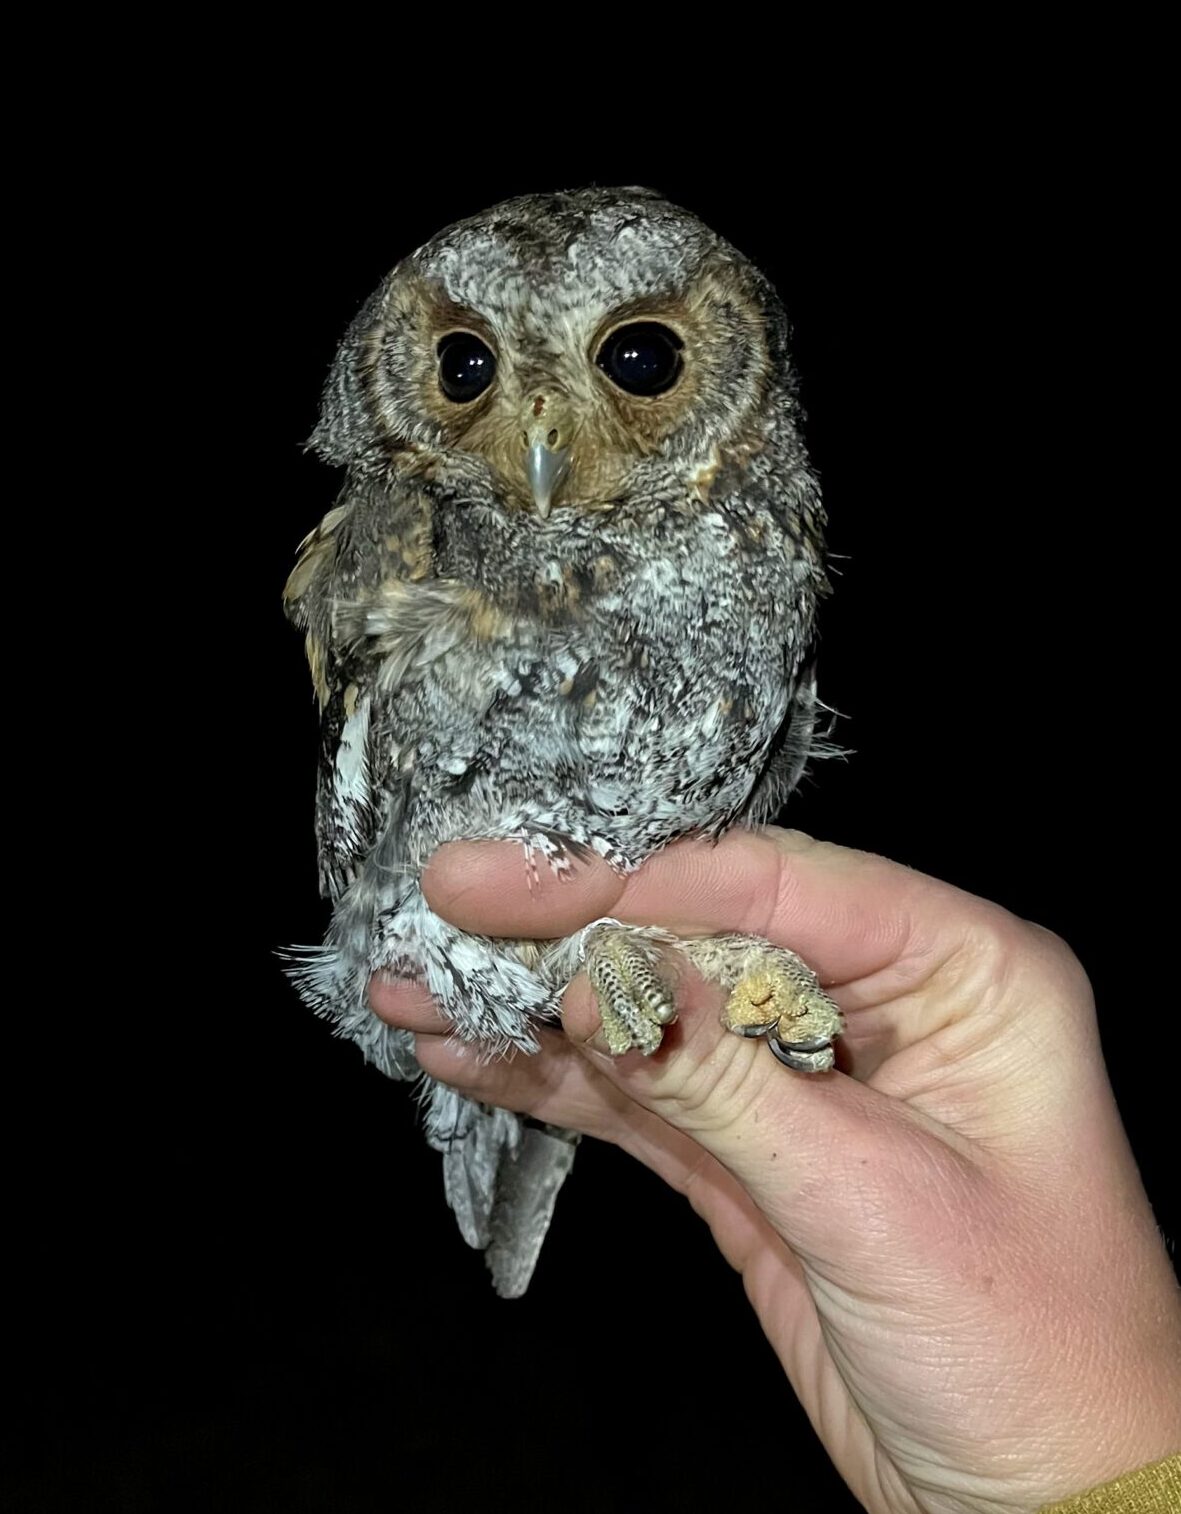 A small Flammulated owl is being held by an owl bander in photographer's grip for a photo with a black background.